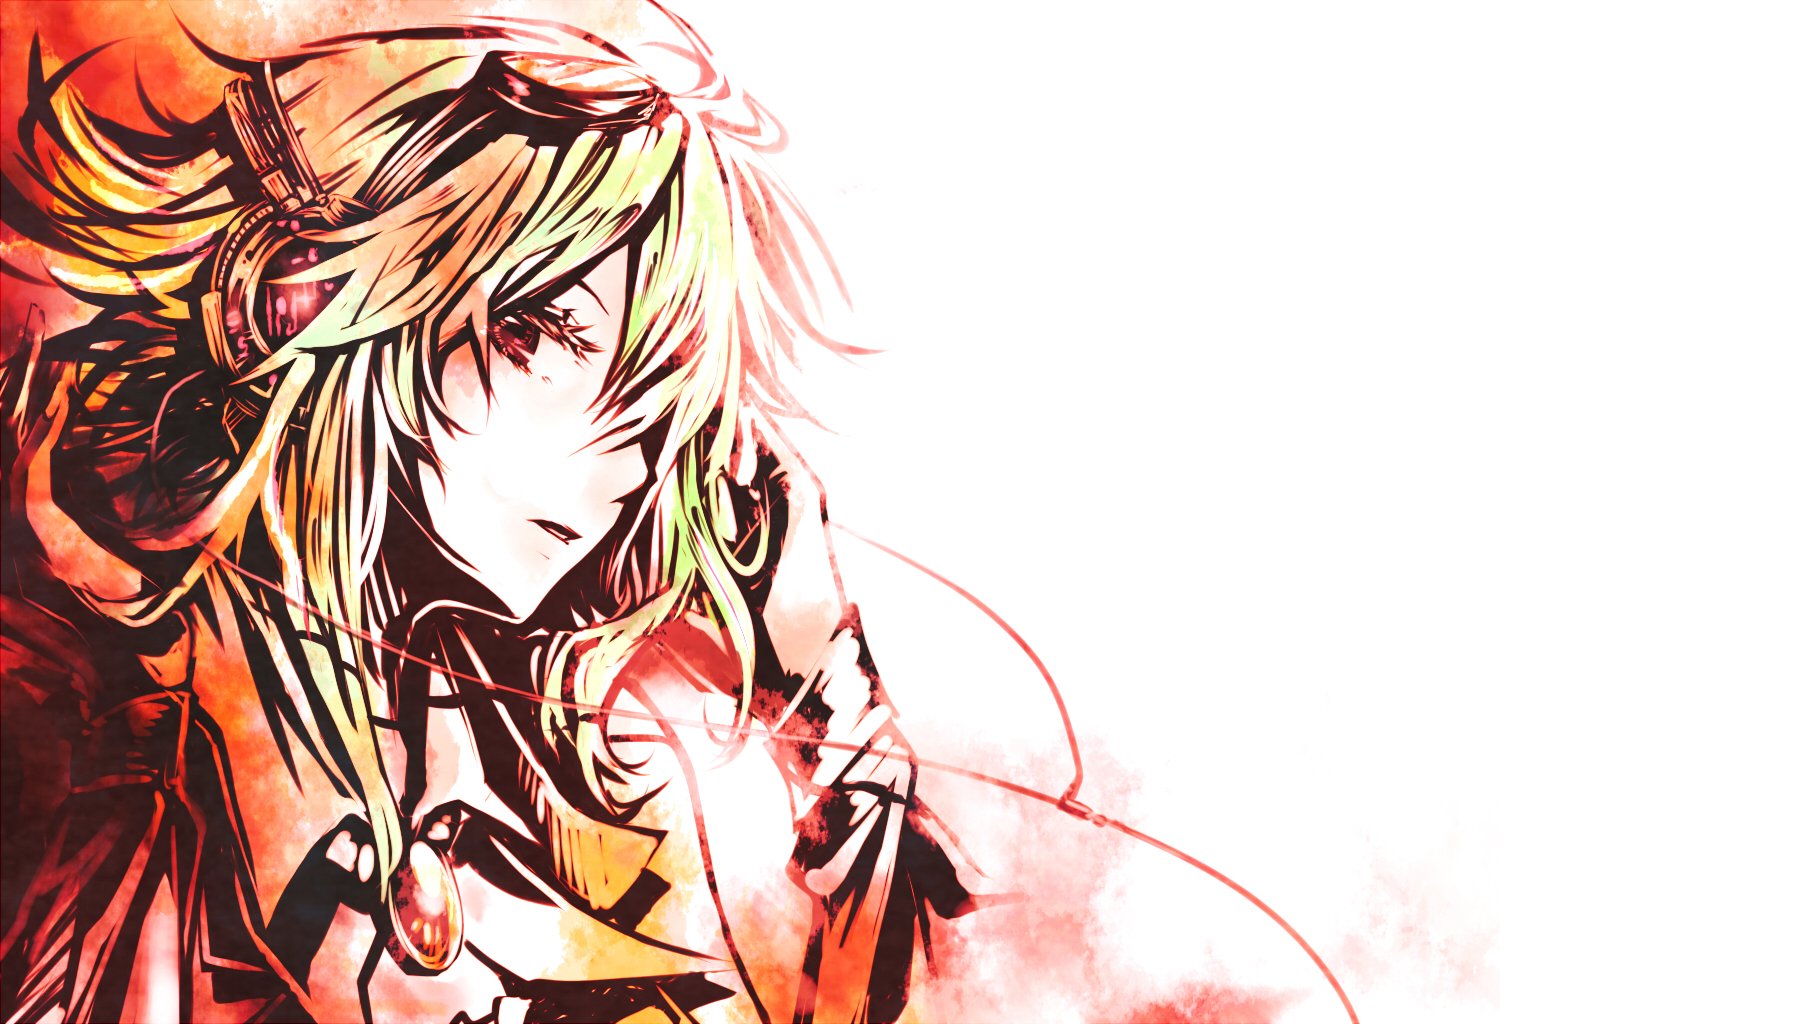 442 Gumi Vocaloid Hd Wallpapers Background Images Wallpaper Abyss